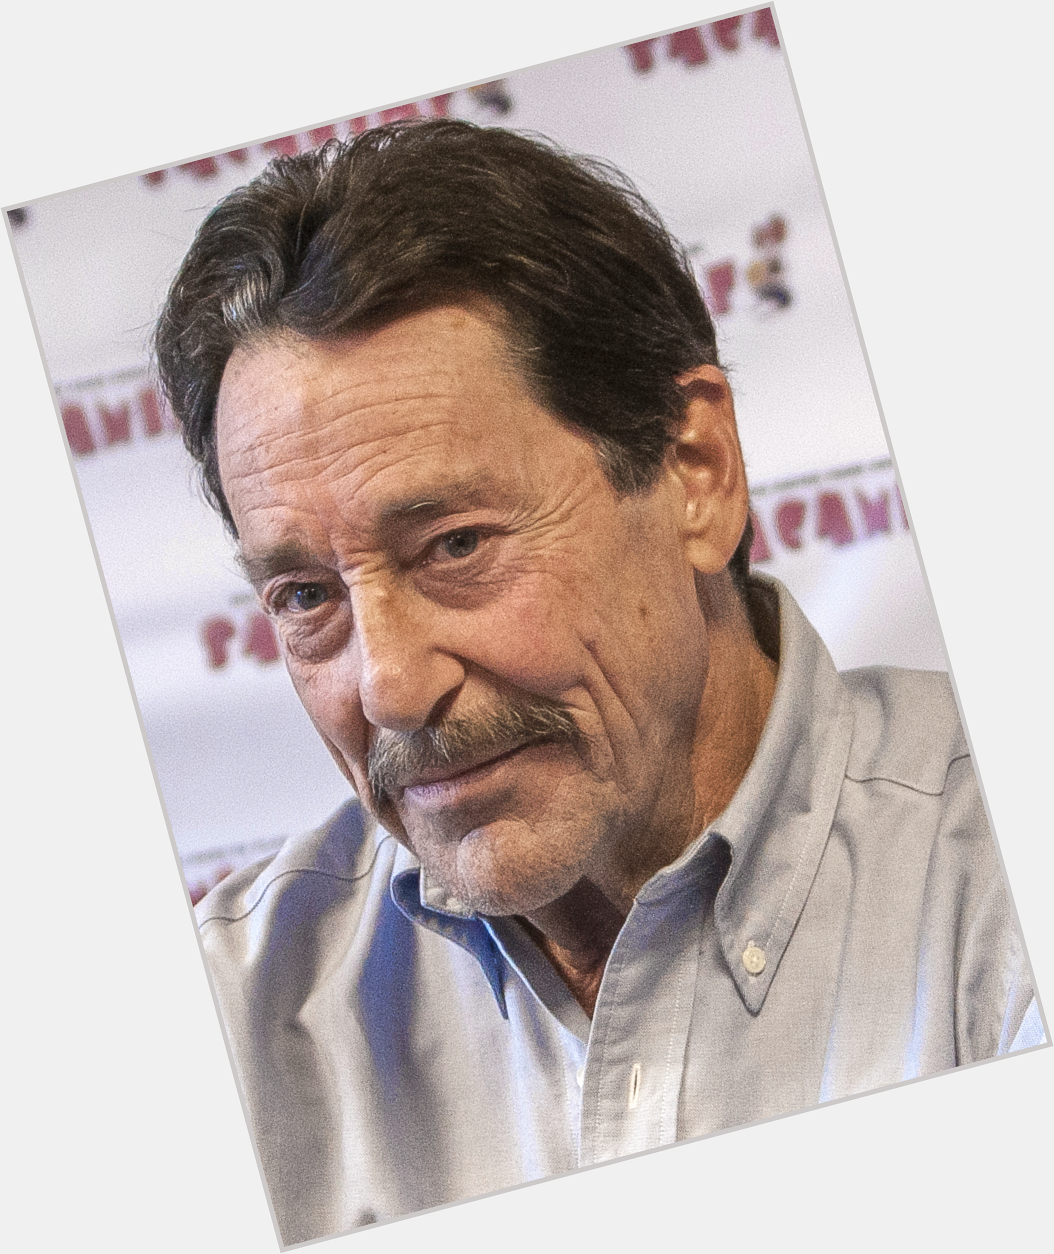 A very Happy Birthday to Peter Cullen. The ONE true voice of Optimus Prime (among other voices). 